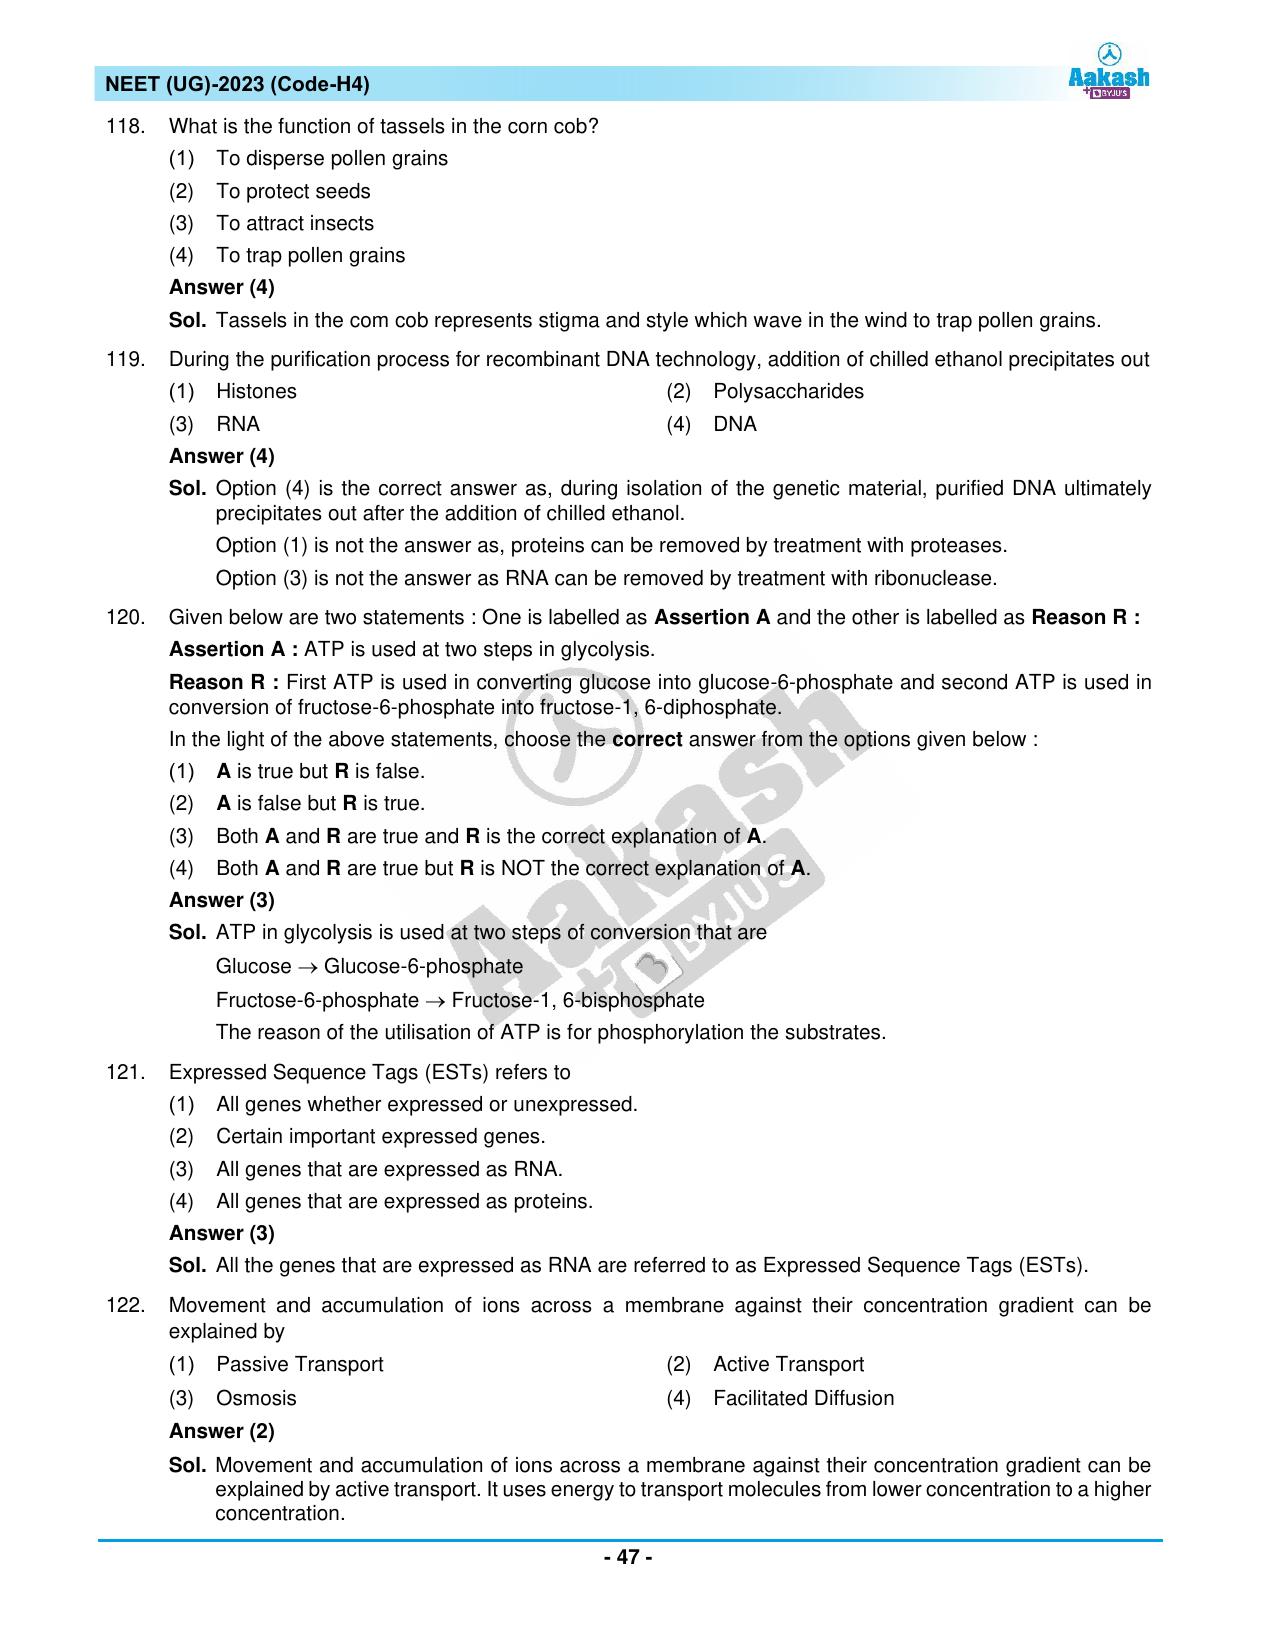 NEET 2023 Question Paper H4 - Page 47